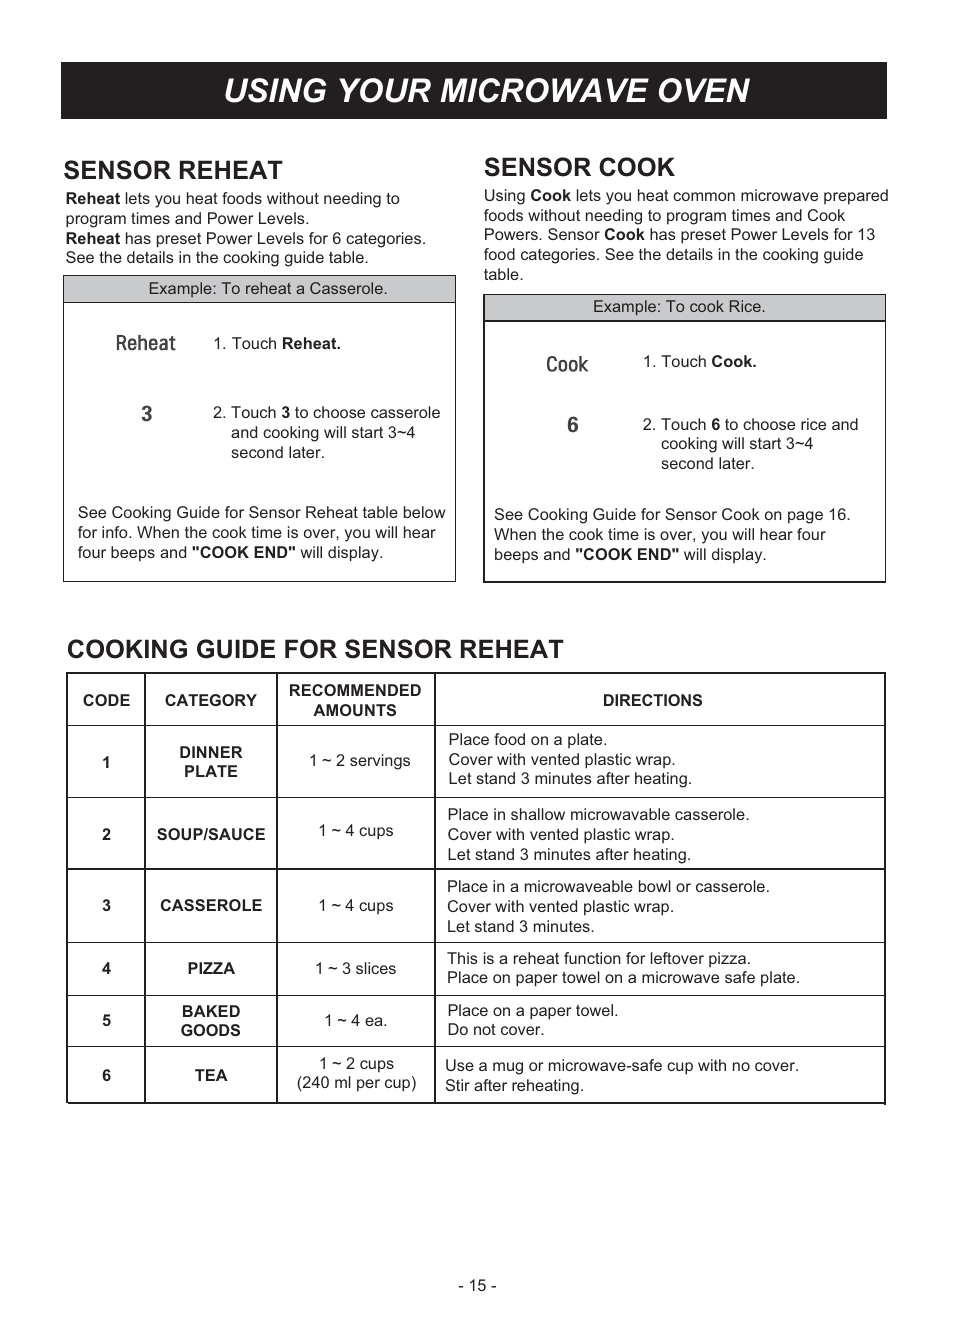 Using your microwave oven, Sensor cook, Sensor reheat LG LMHM2237ST User Manual Page 15 / 32